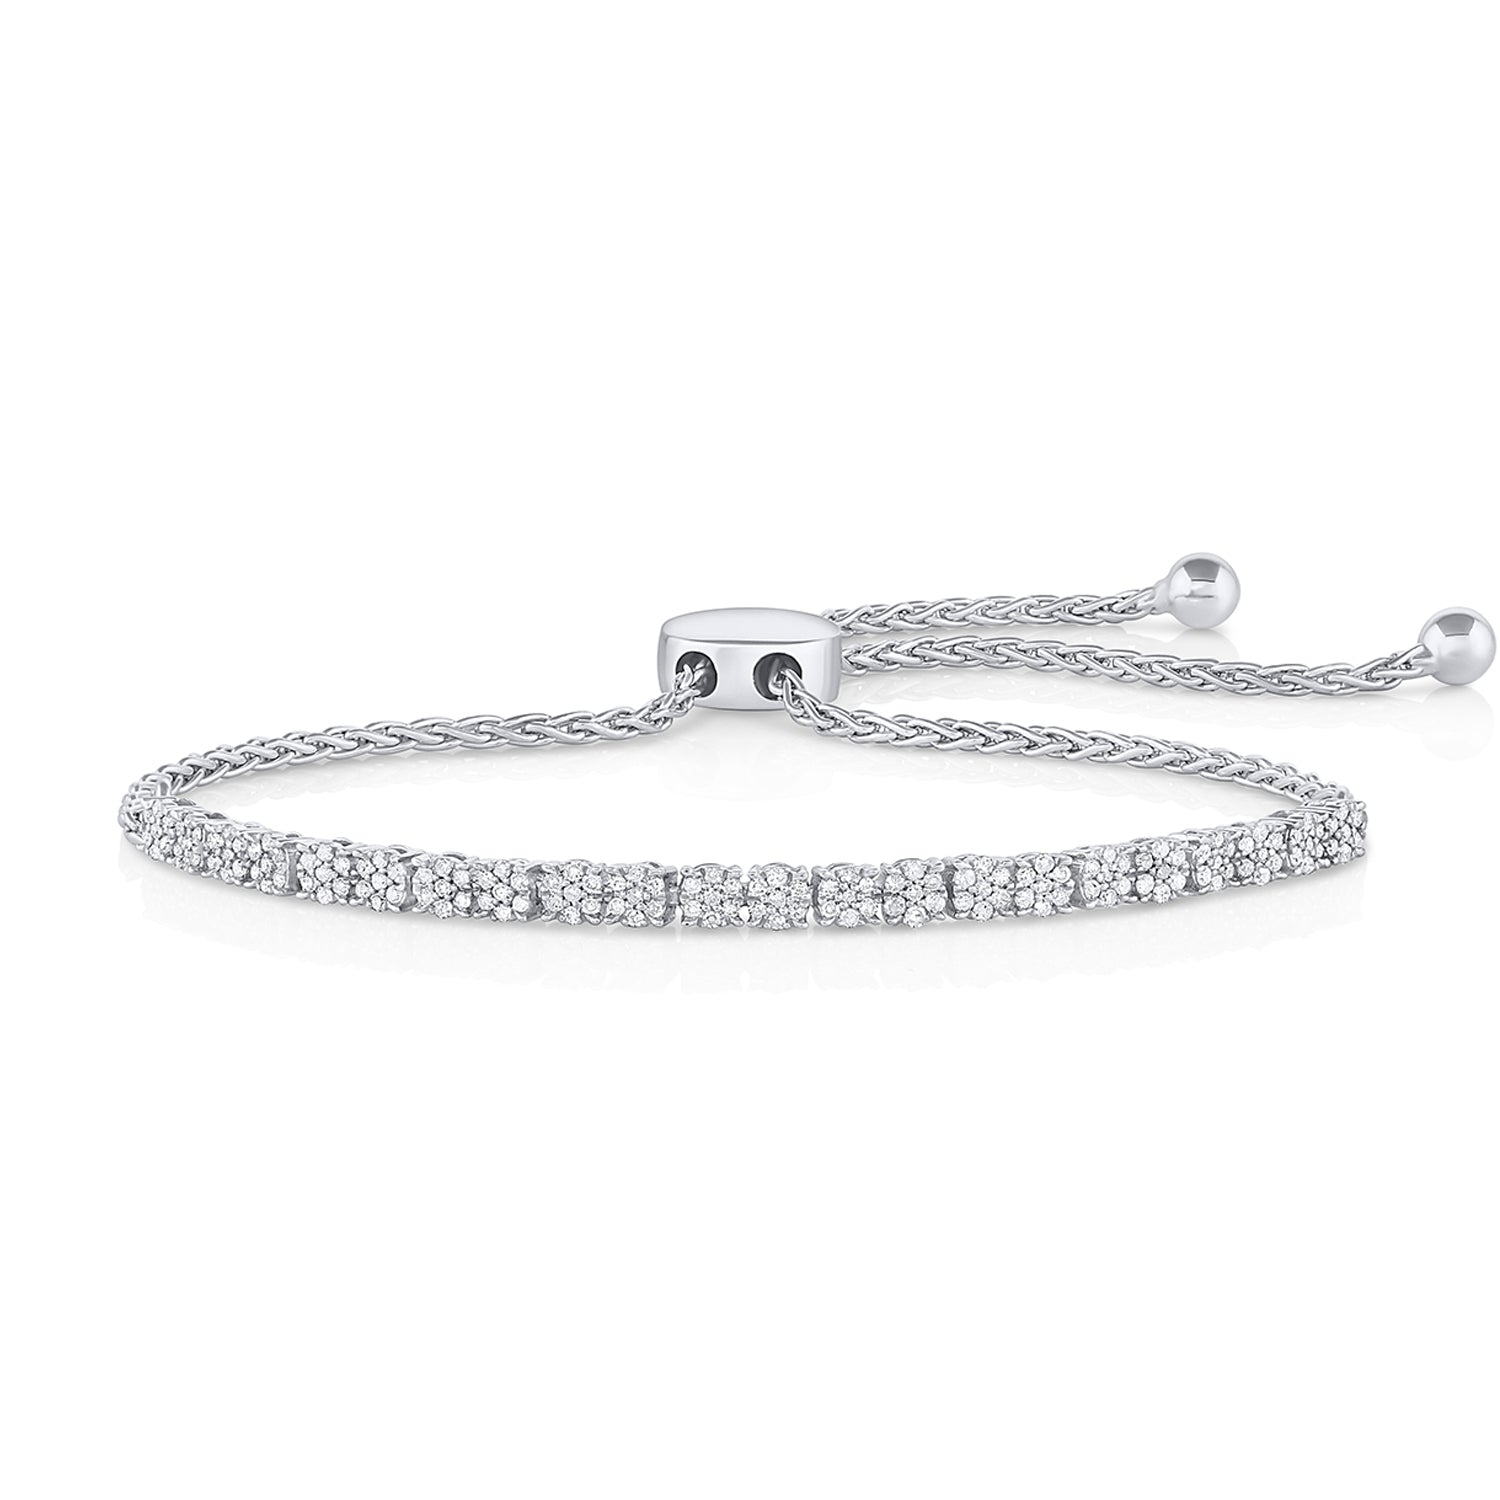 0.50 Carat Round Cut Natural Diamond Bracelet Made of Sterling SIlver